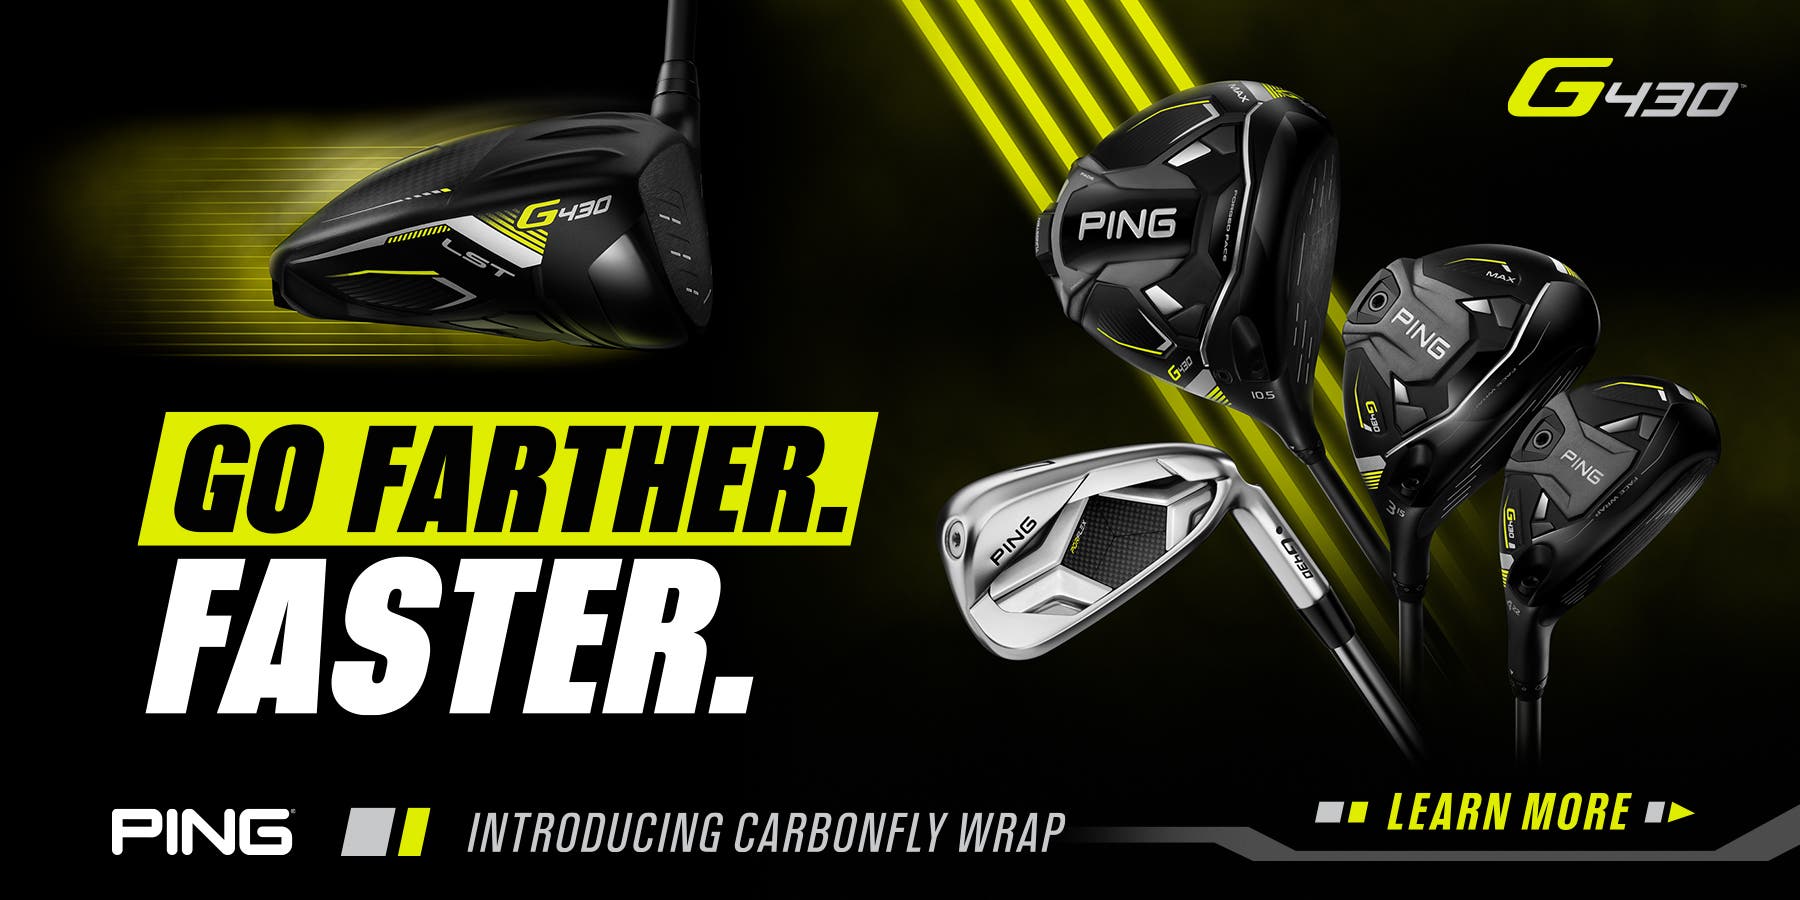 New PING G430 Golf Clubs Bring The Speed